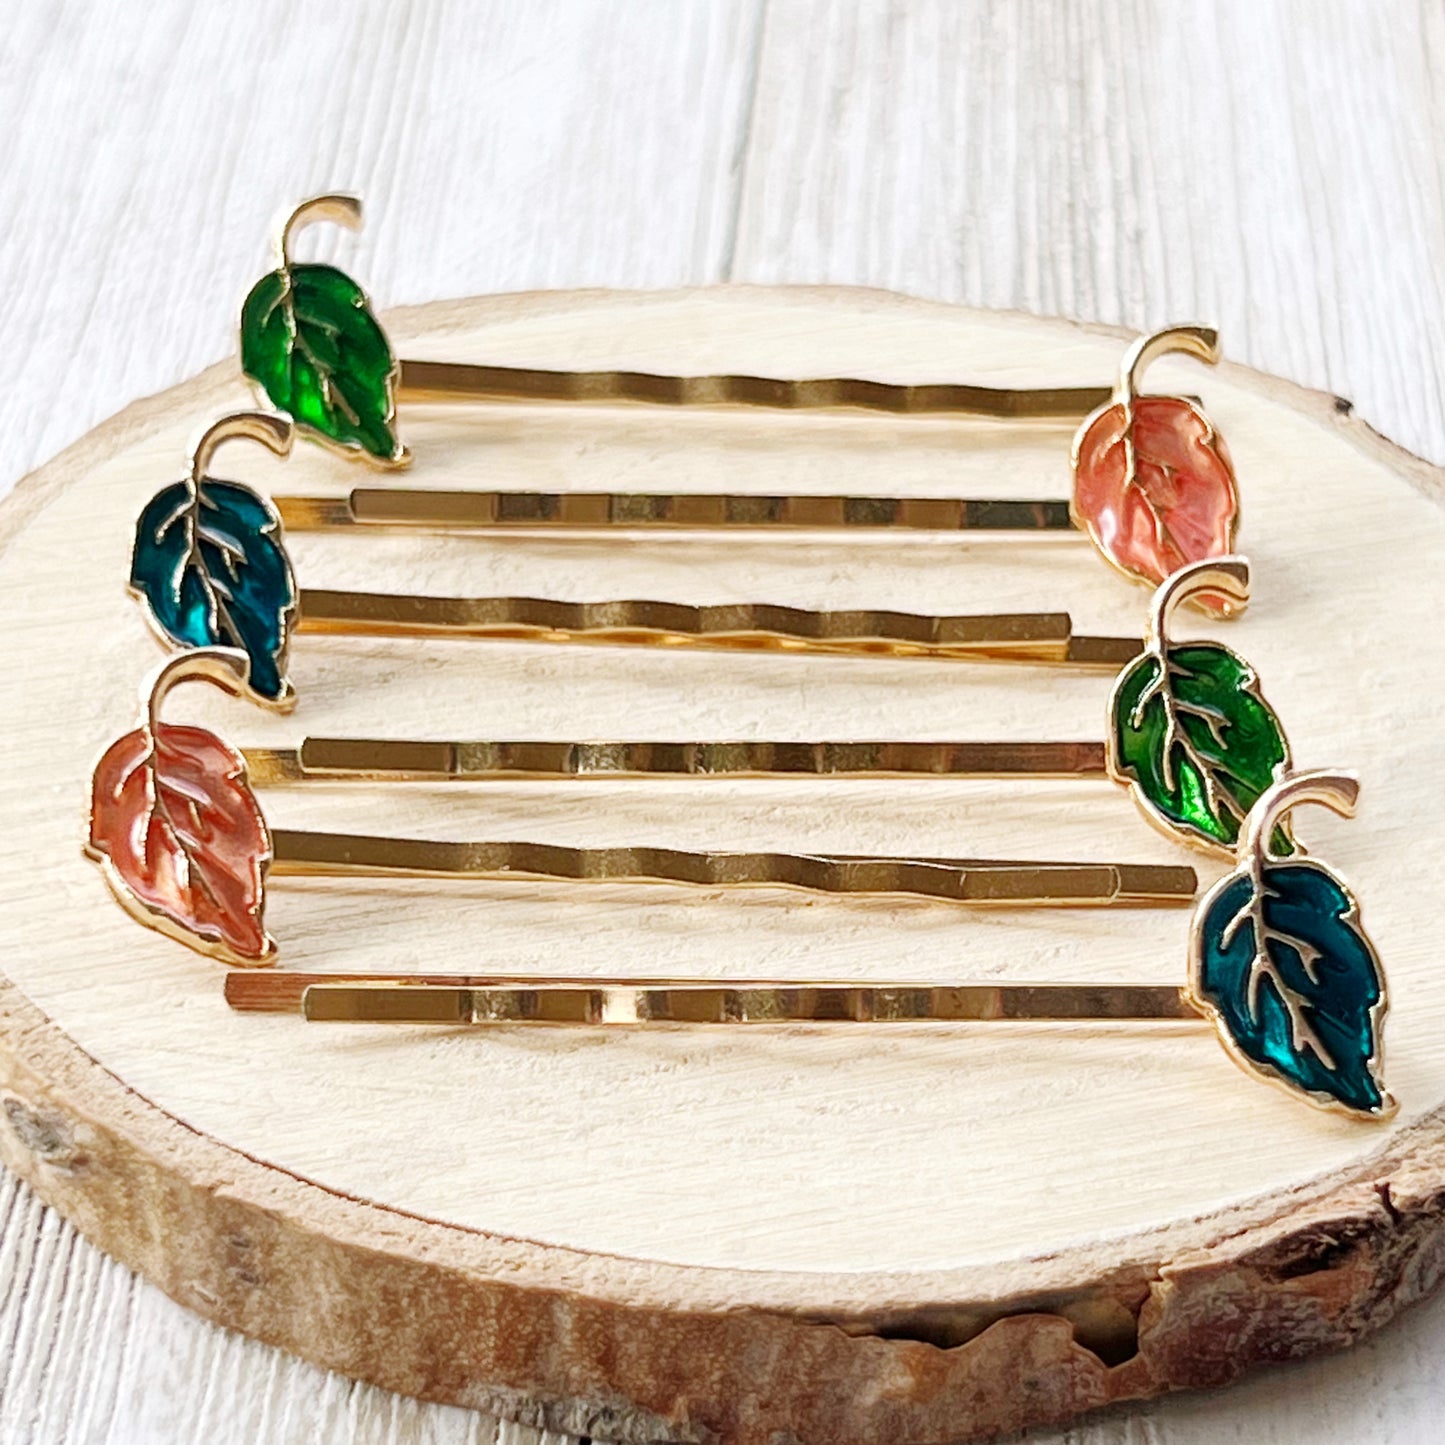 Enamel Leaf Hair Pins - Pink, Green & Blue - Colorful & Stylish Accessories